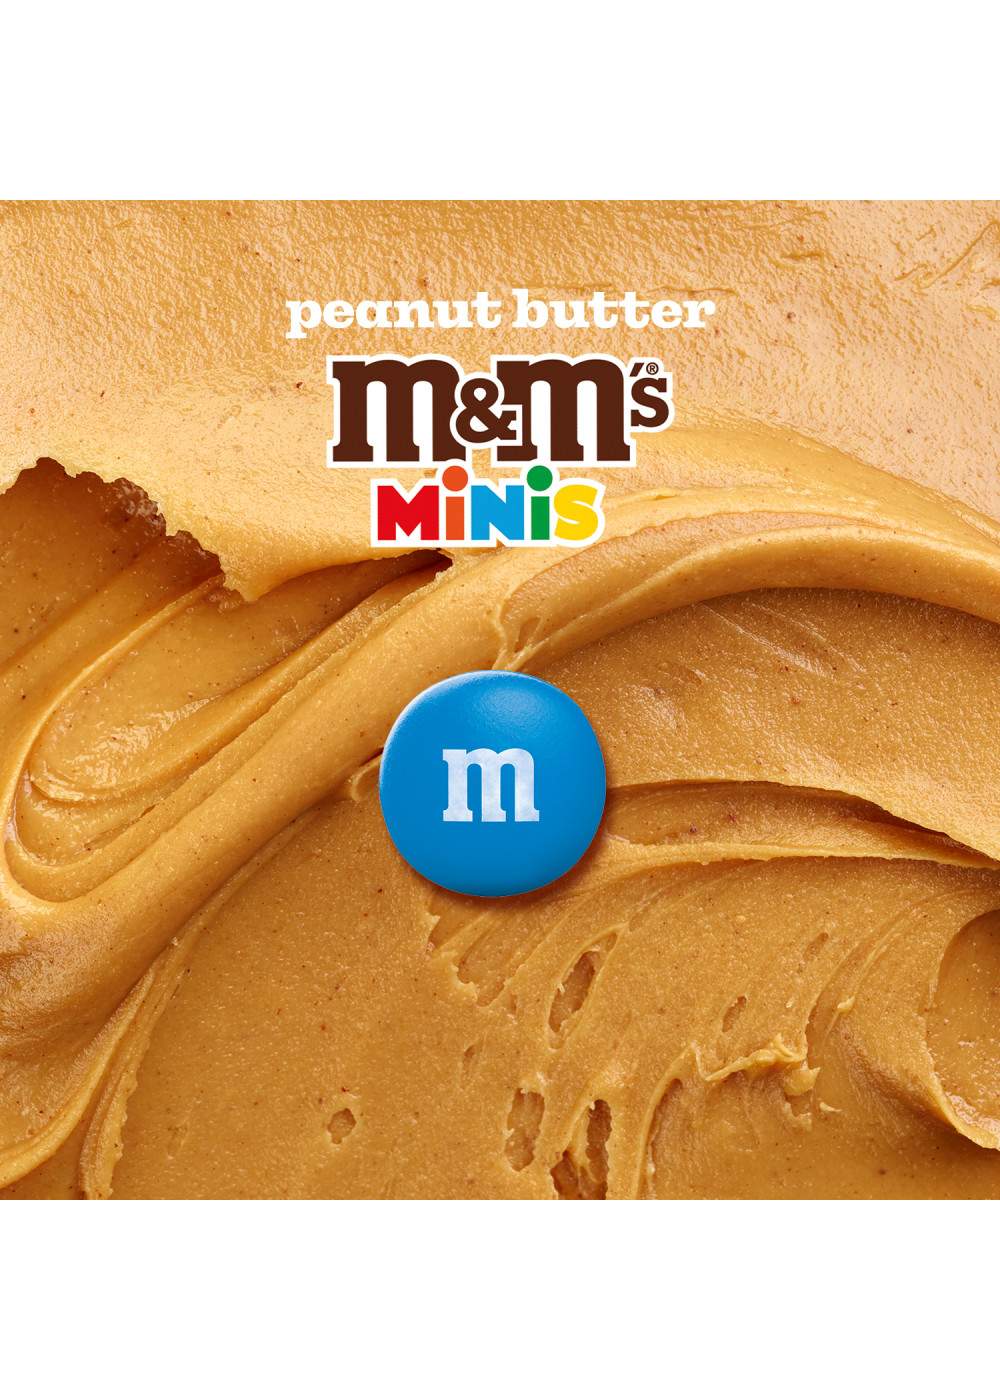 M&M'S Peanut Butter Milk Chocolate Candy Sharing Size Resealable